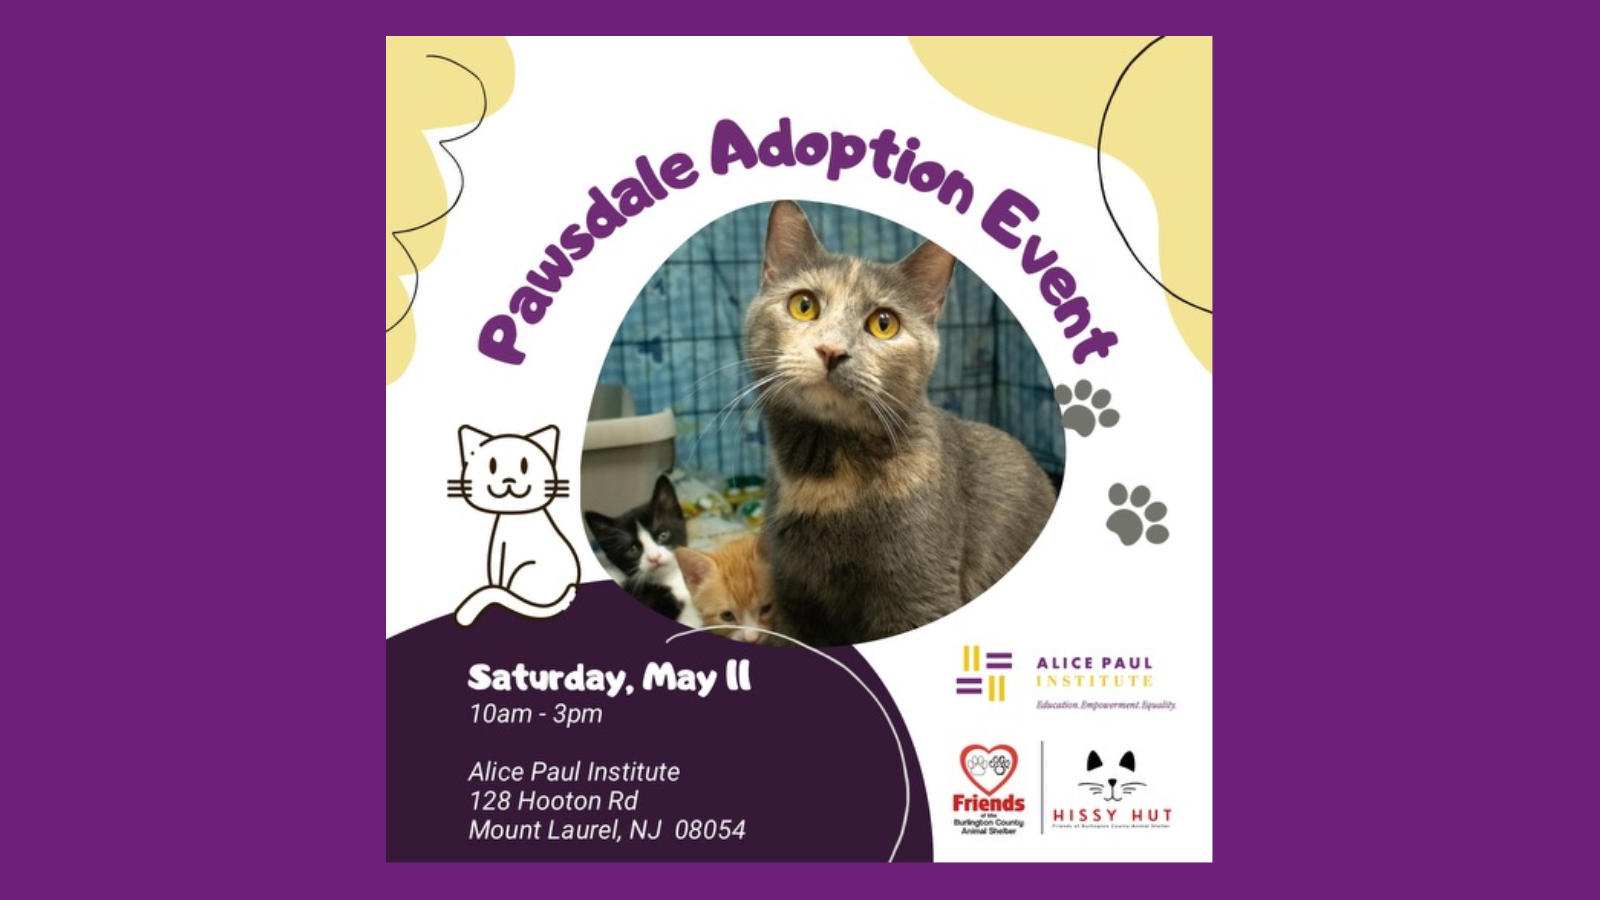 Pawsdale Adoption Event